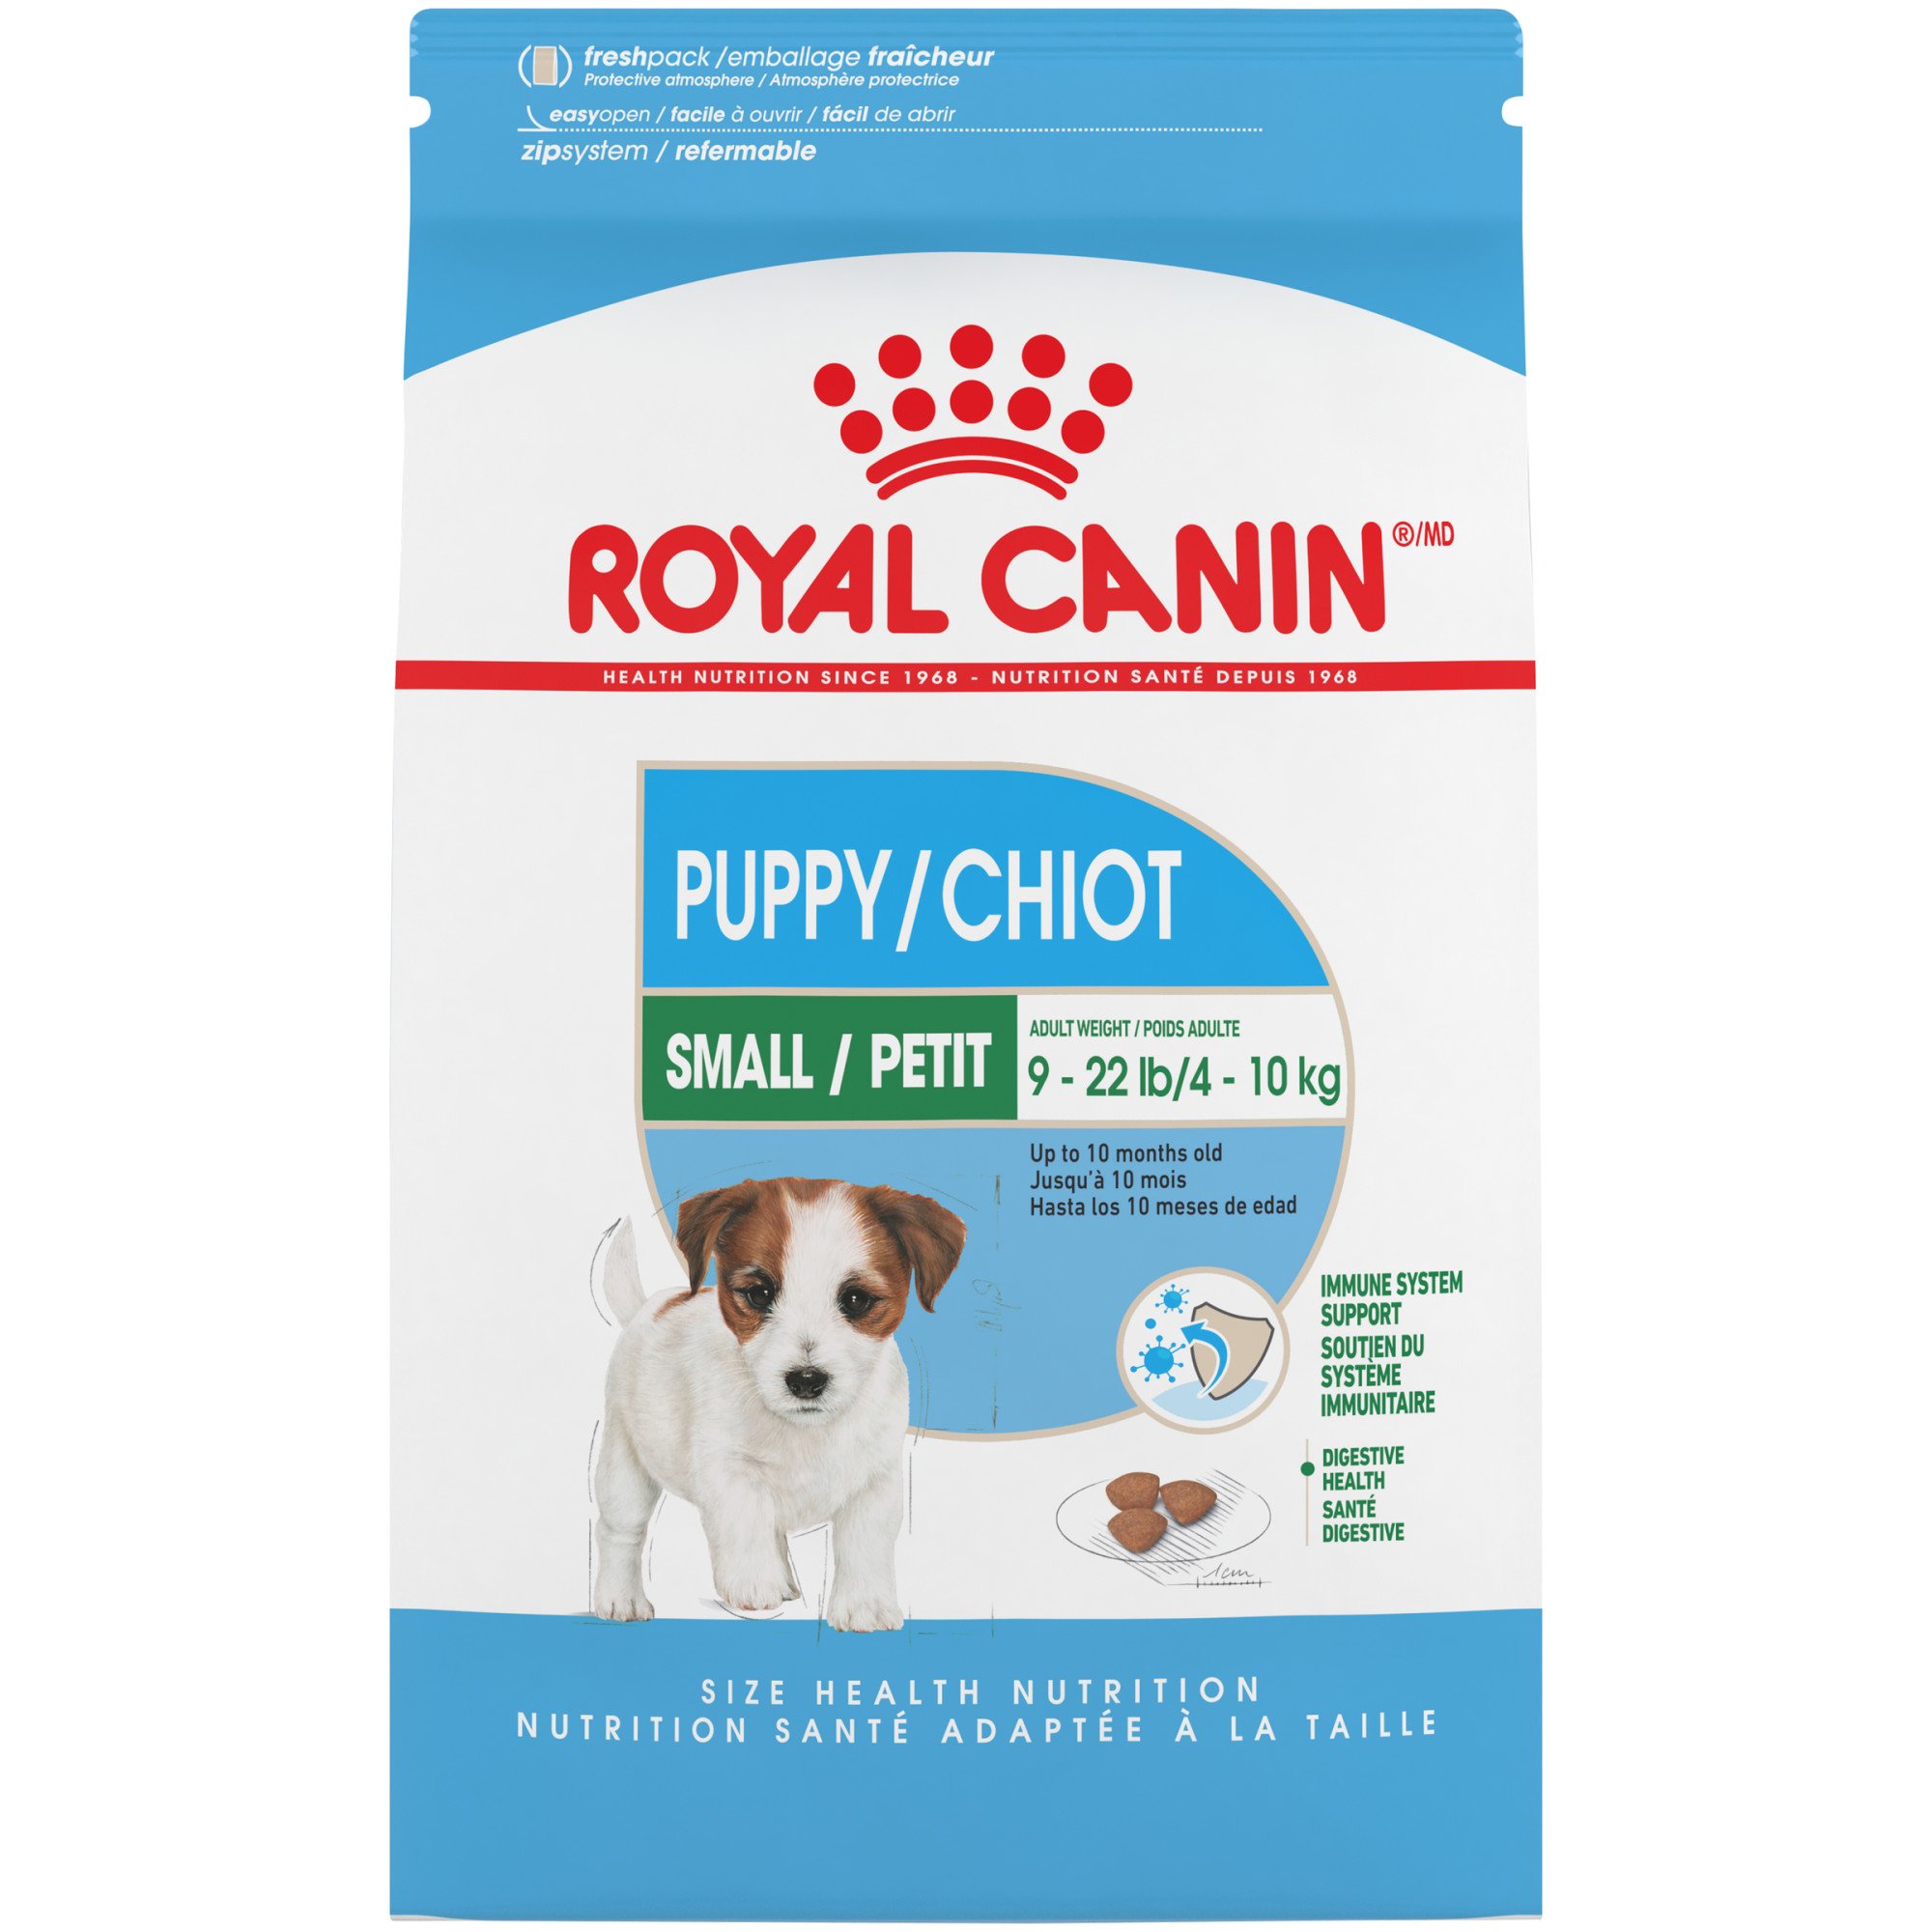 View Royal Canin Puppy
 Gif